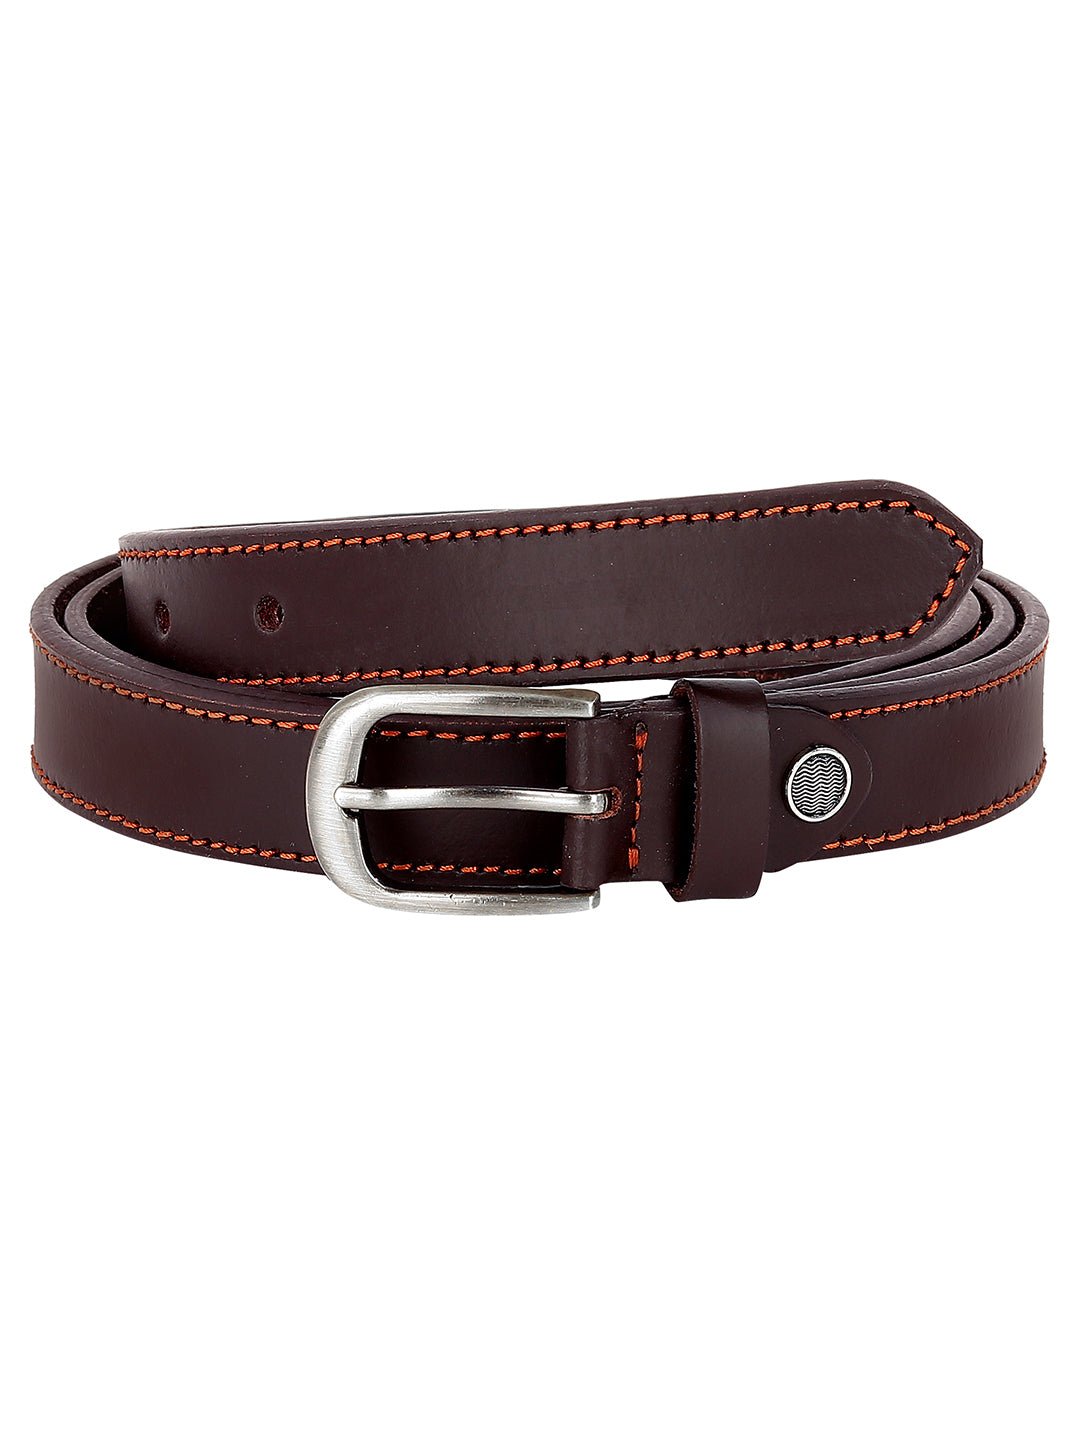 Leather World Formal Casual Brown Branded Stylish Genuine Leather Belts for Women